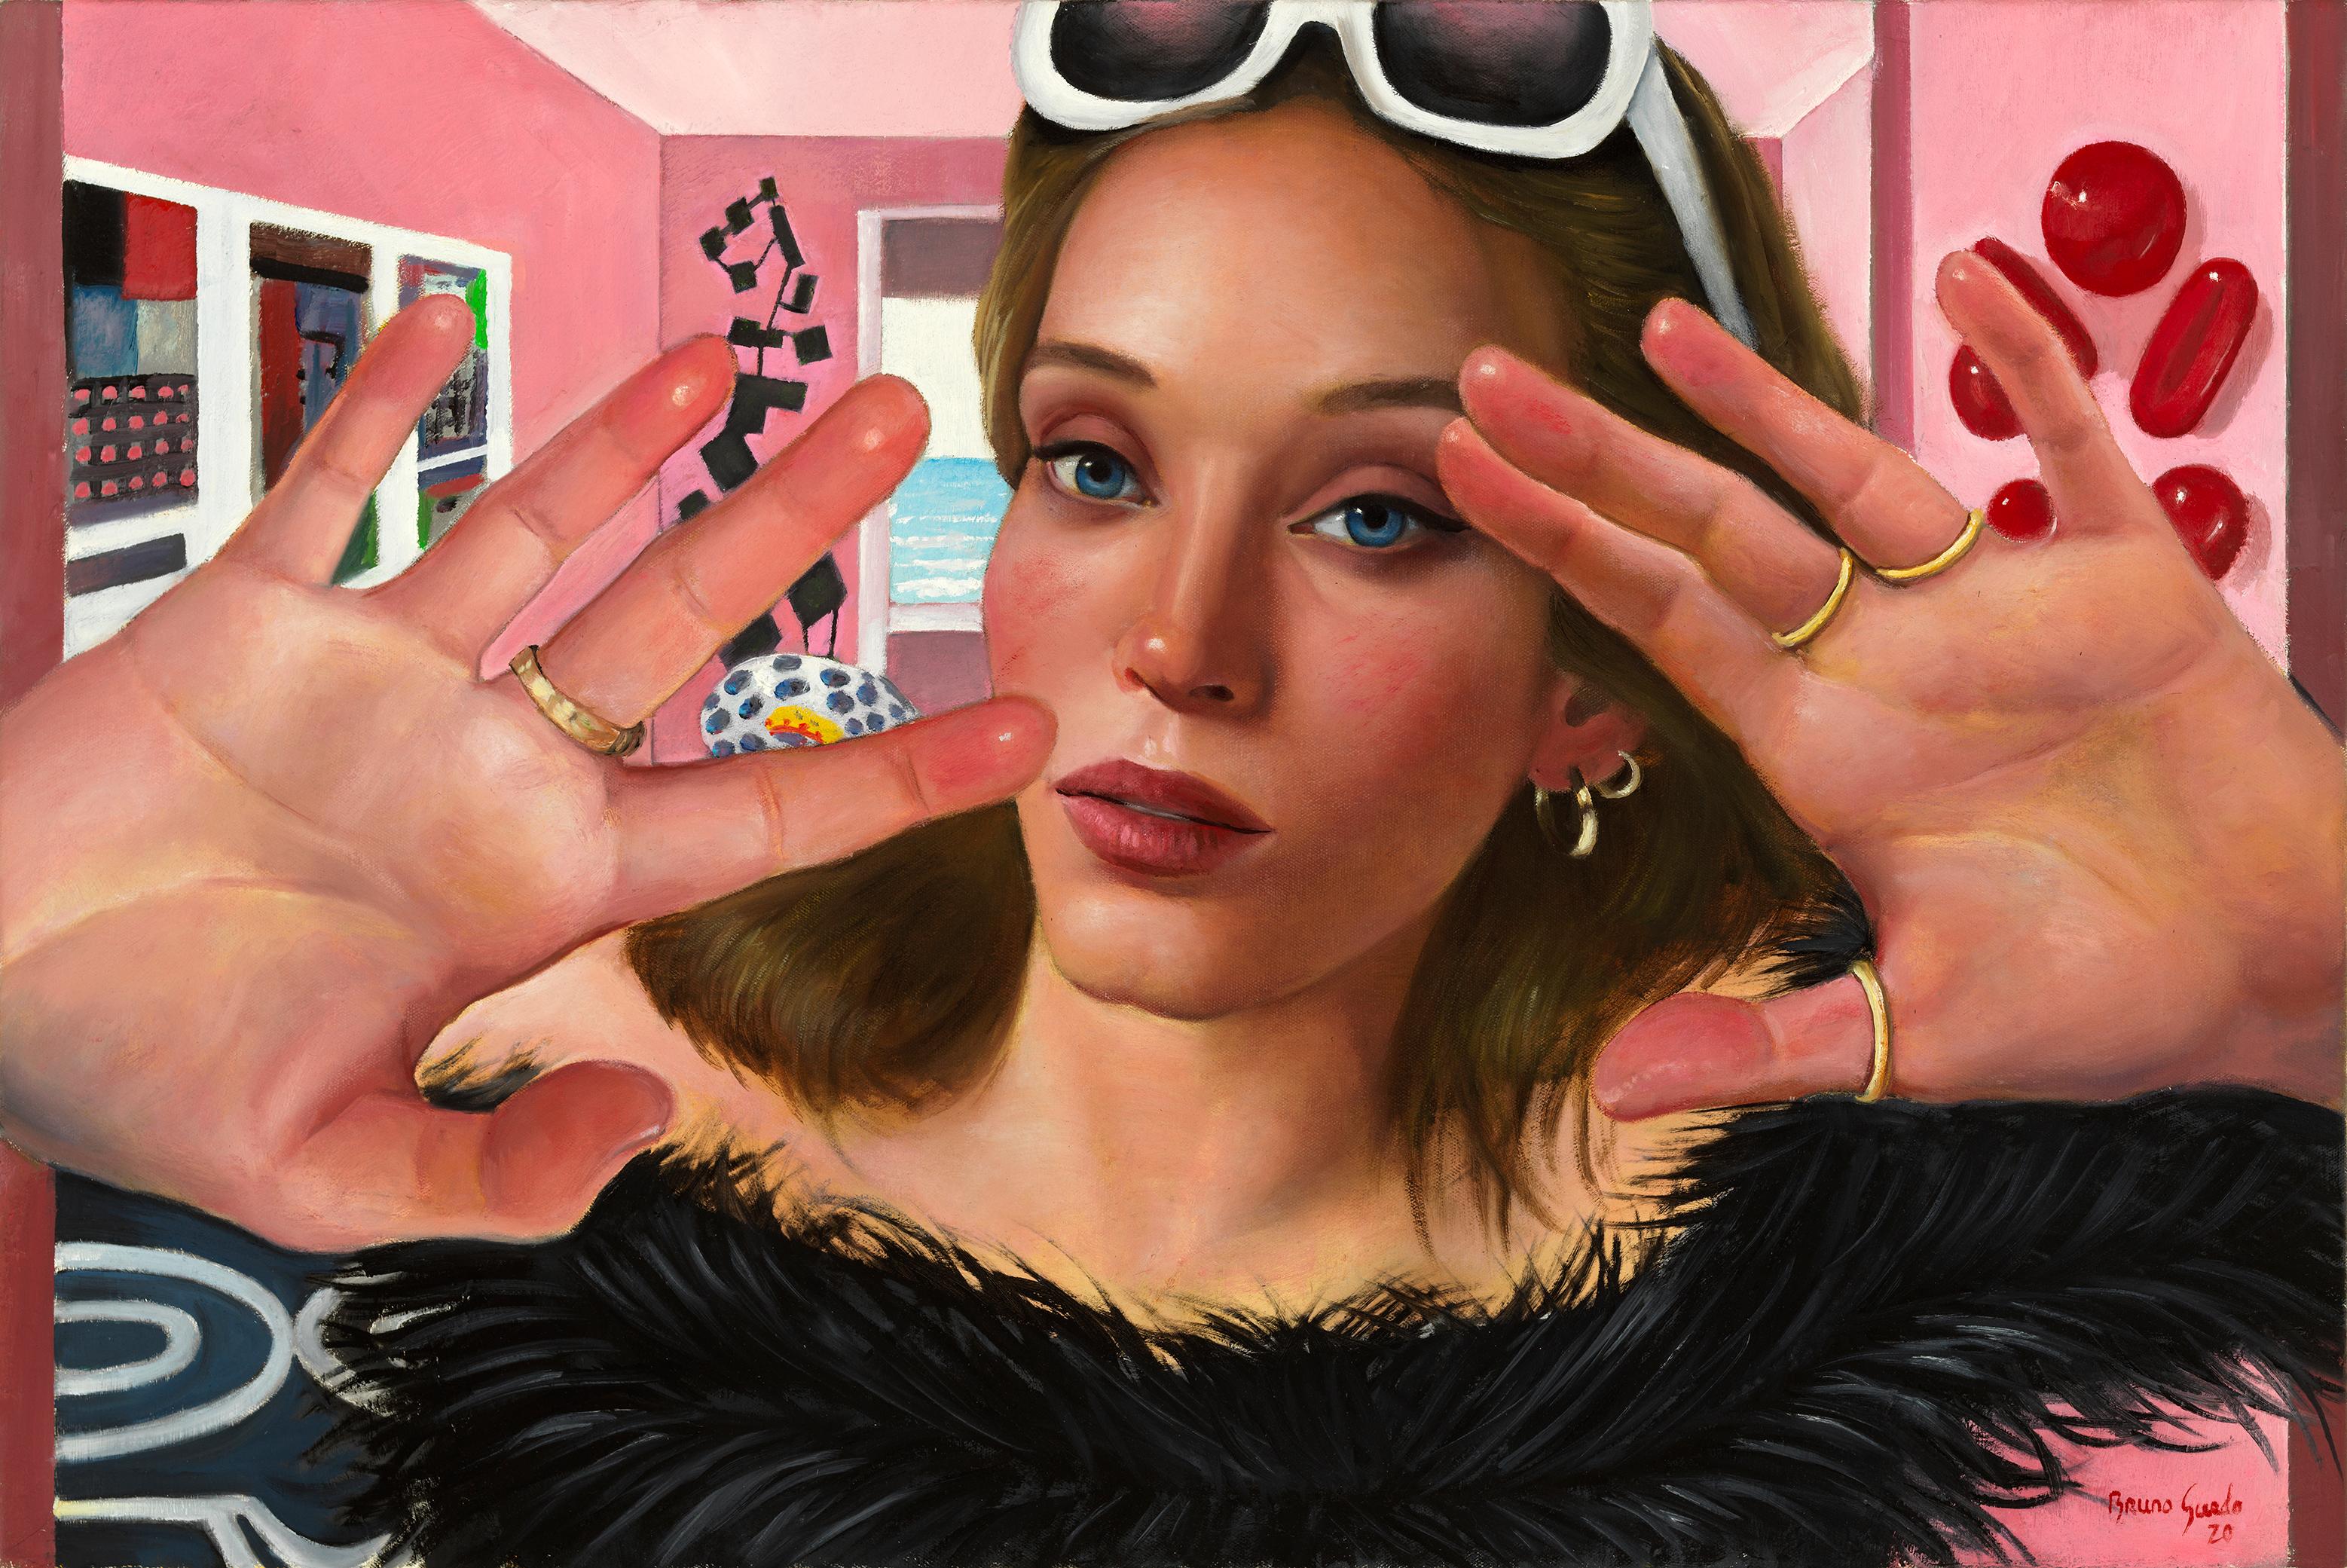 Bruno Surdo Figurative Painting - The Collector -Woman with White Sunglasses & Black Fur, Pink Interior Walls, Oil